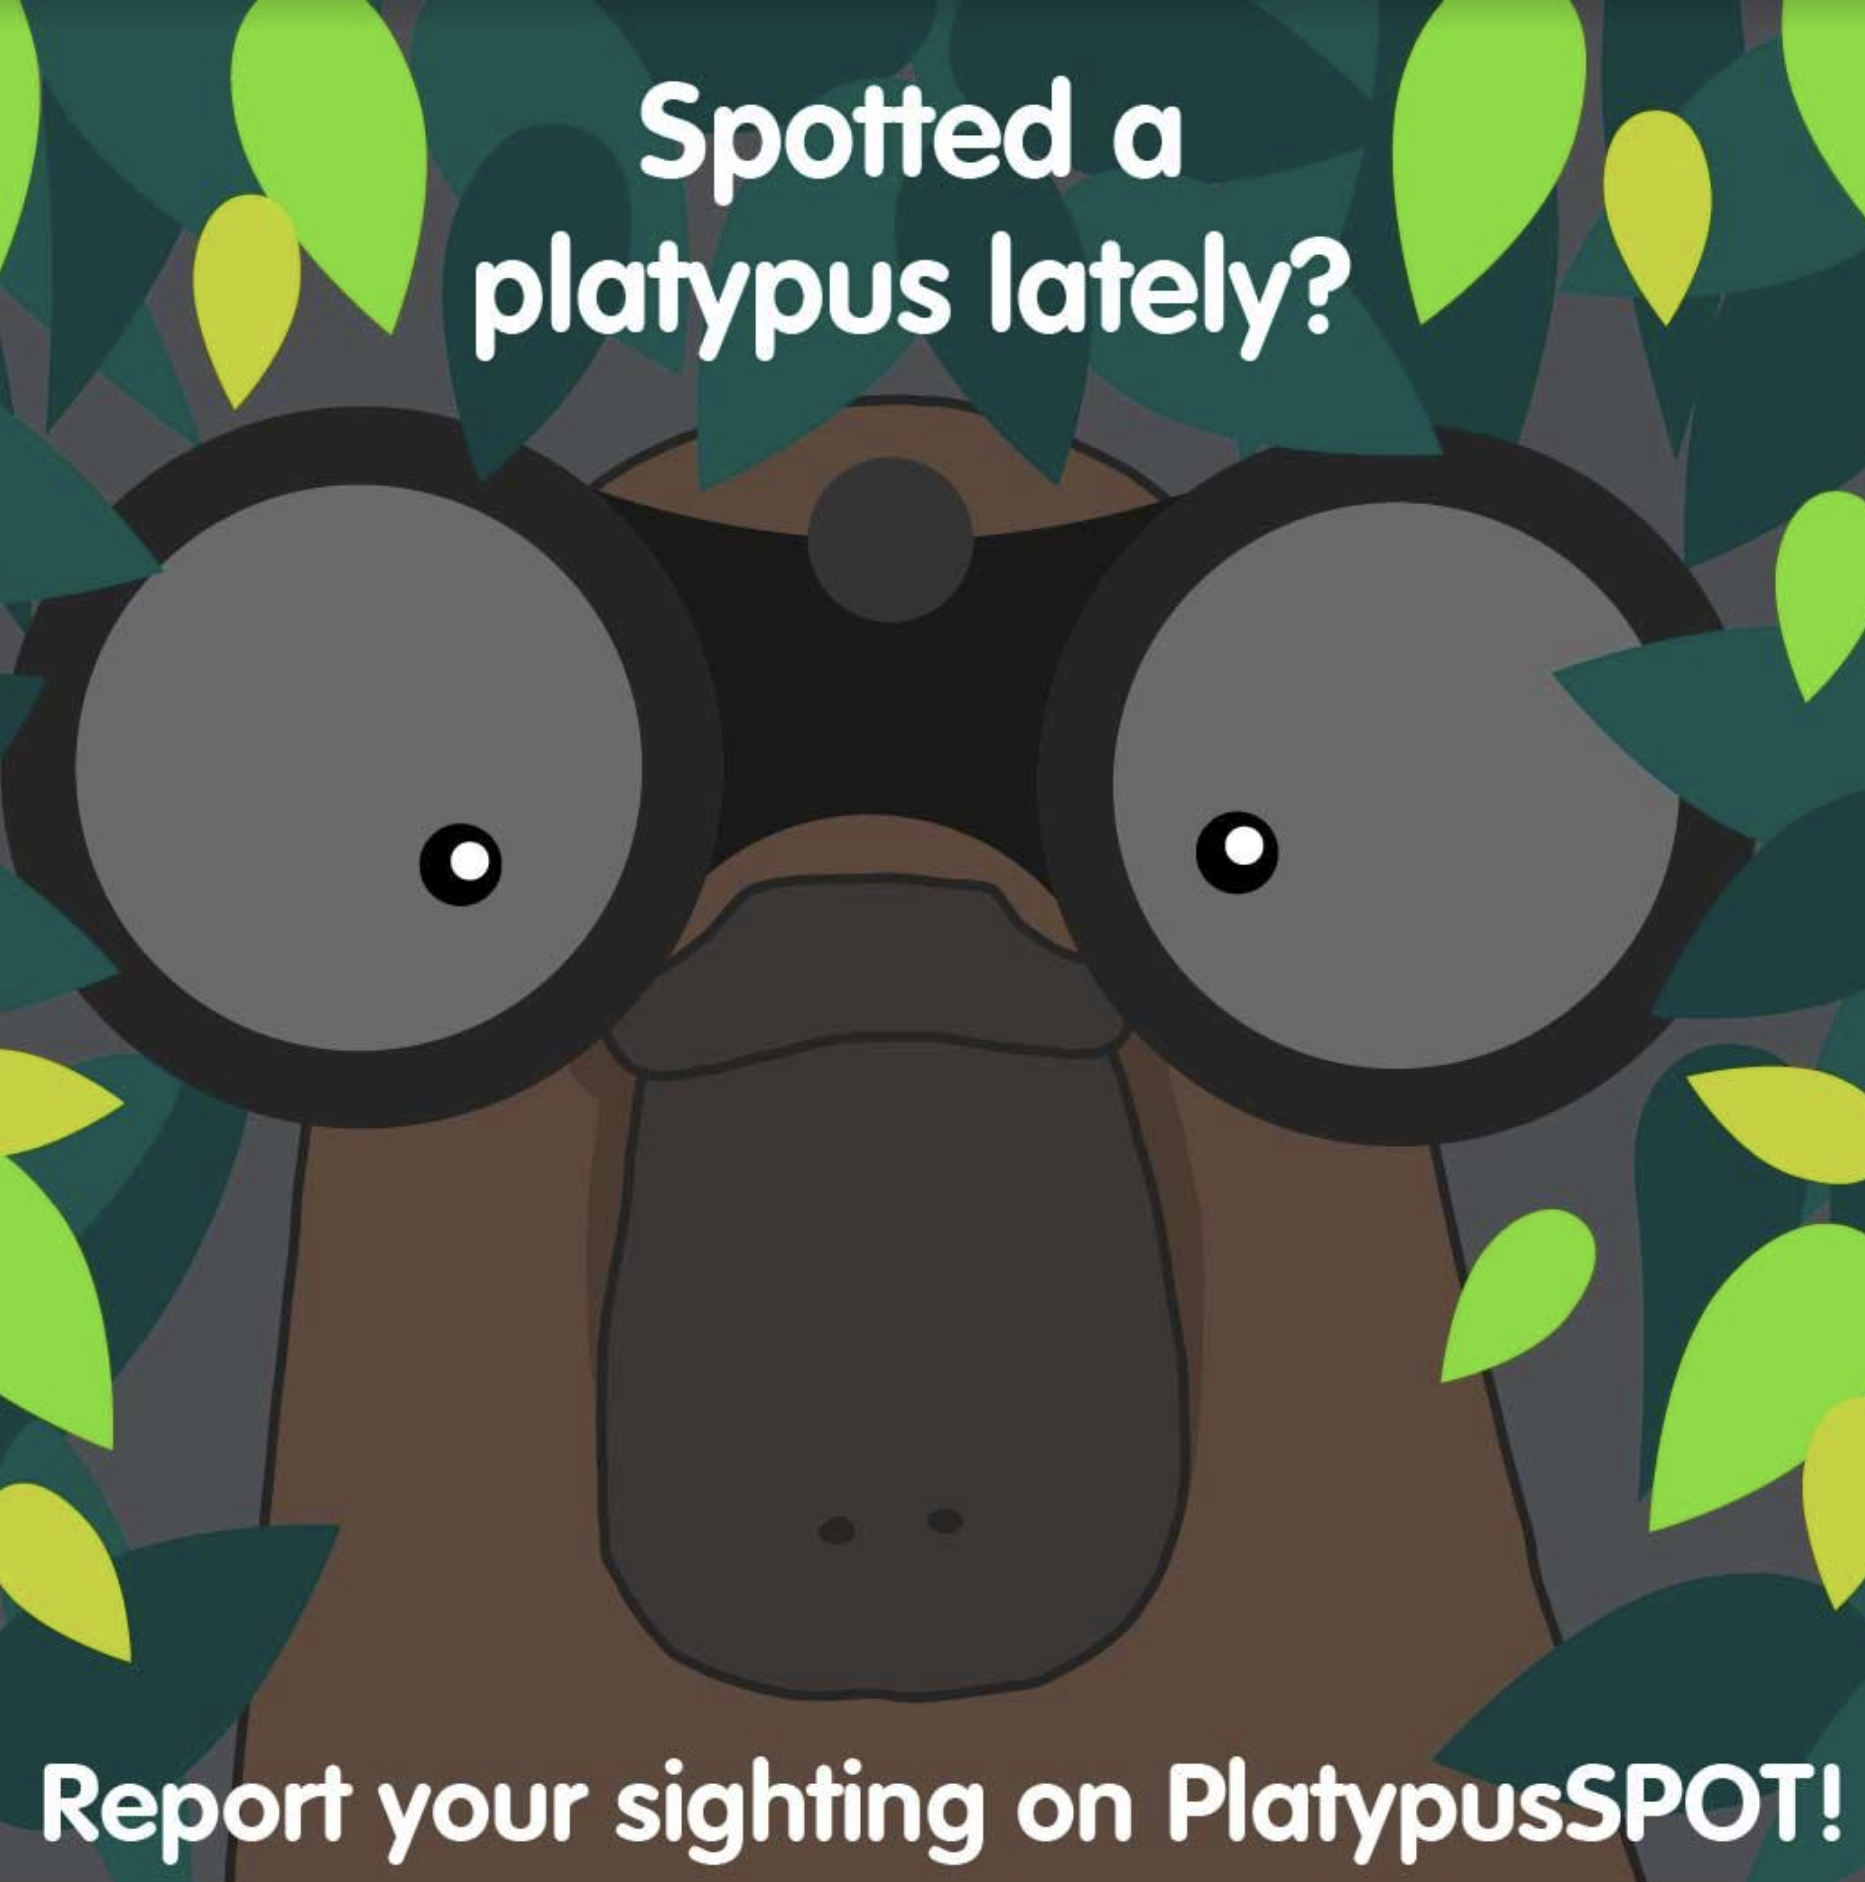 Platypus awareness: helping Melbourne Water shed light on a unique Australian